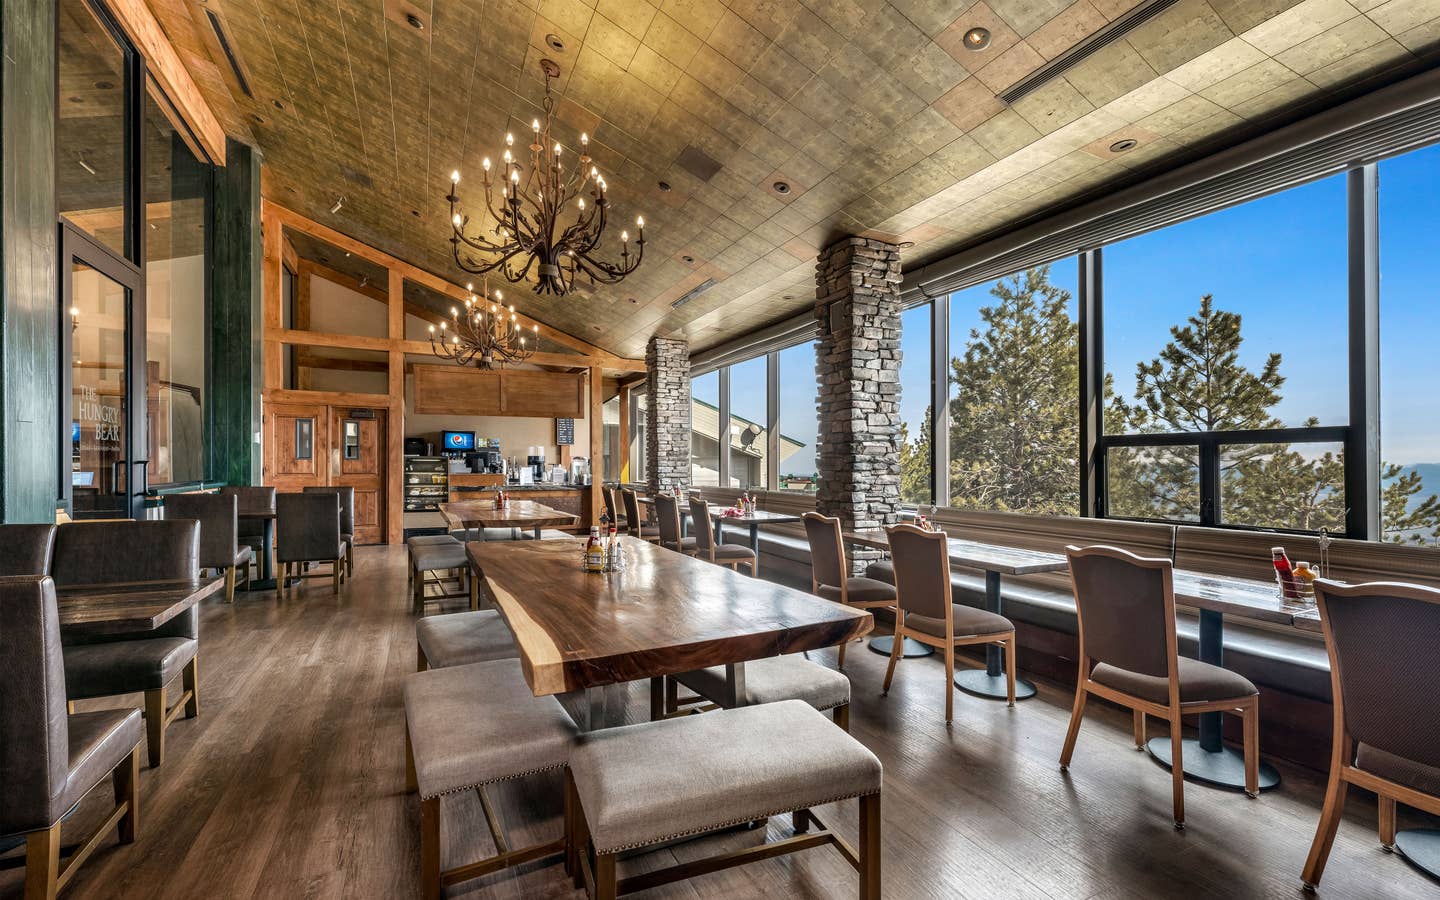 Bistro with a view of Sierra Nevada Mountains at Tahoe Ridge Resort in Stateline, Nevada.